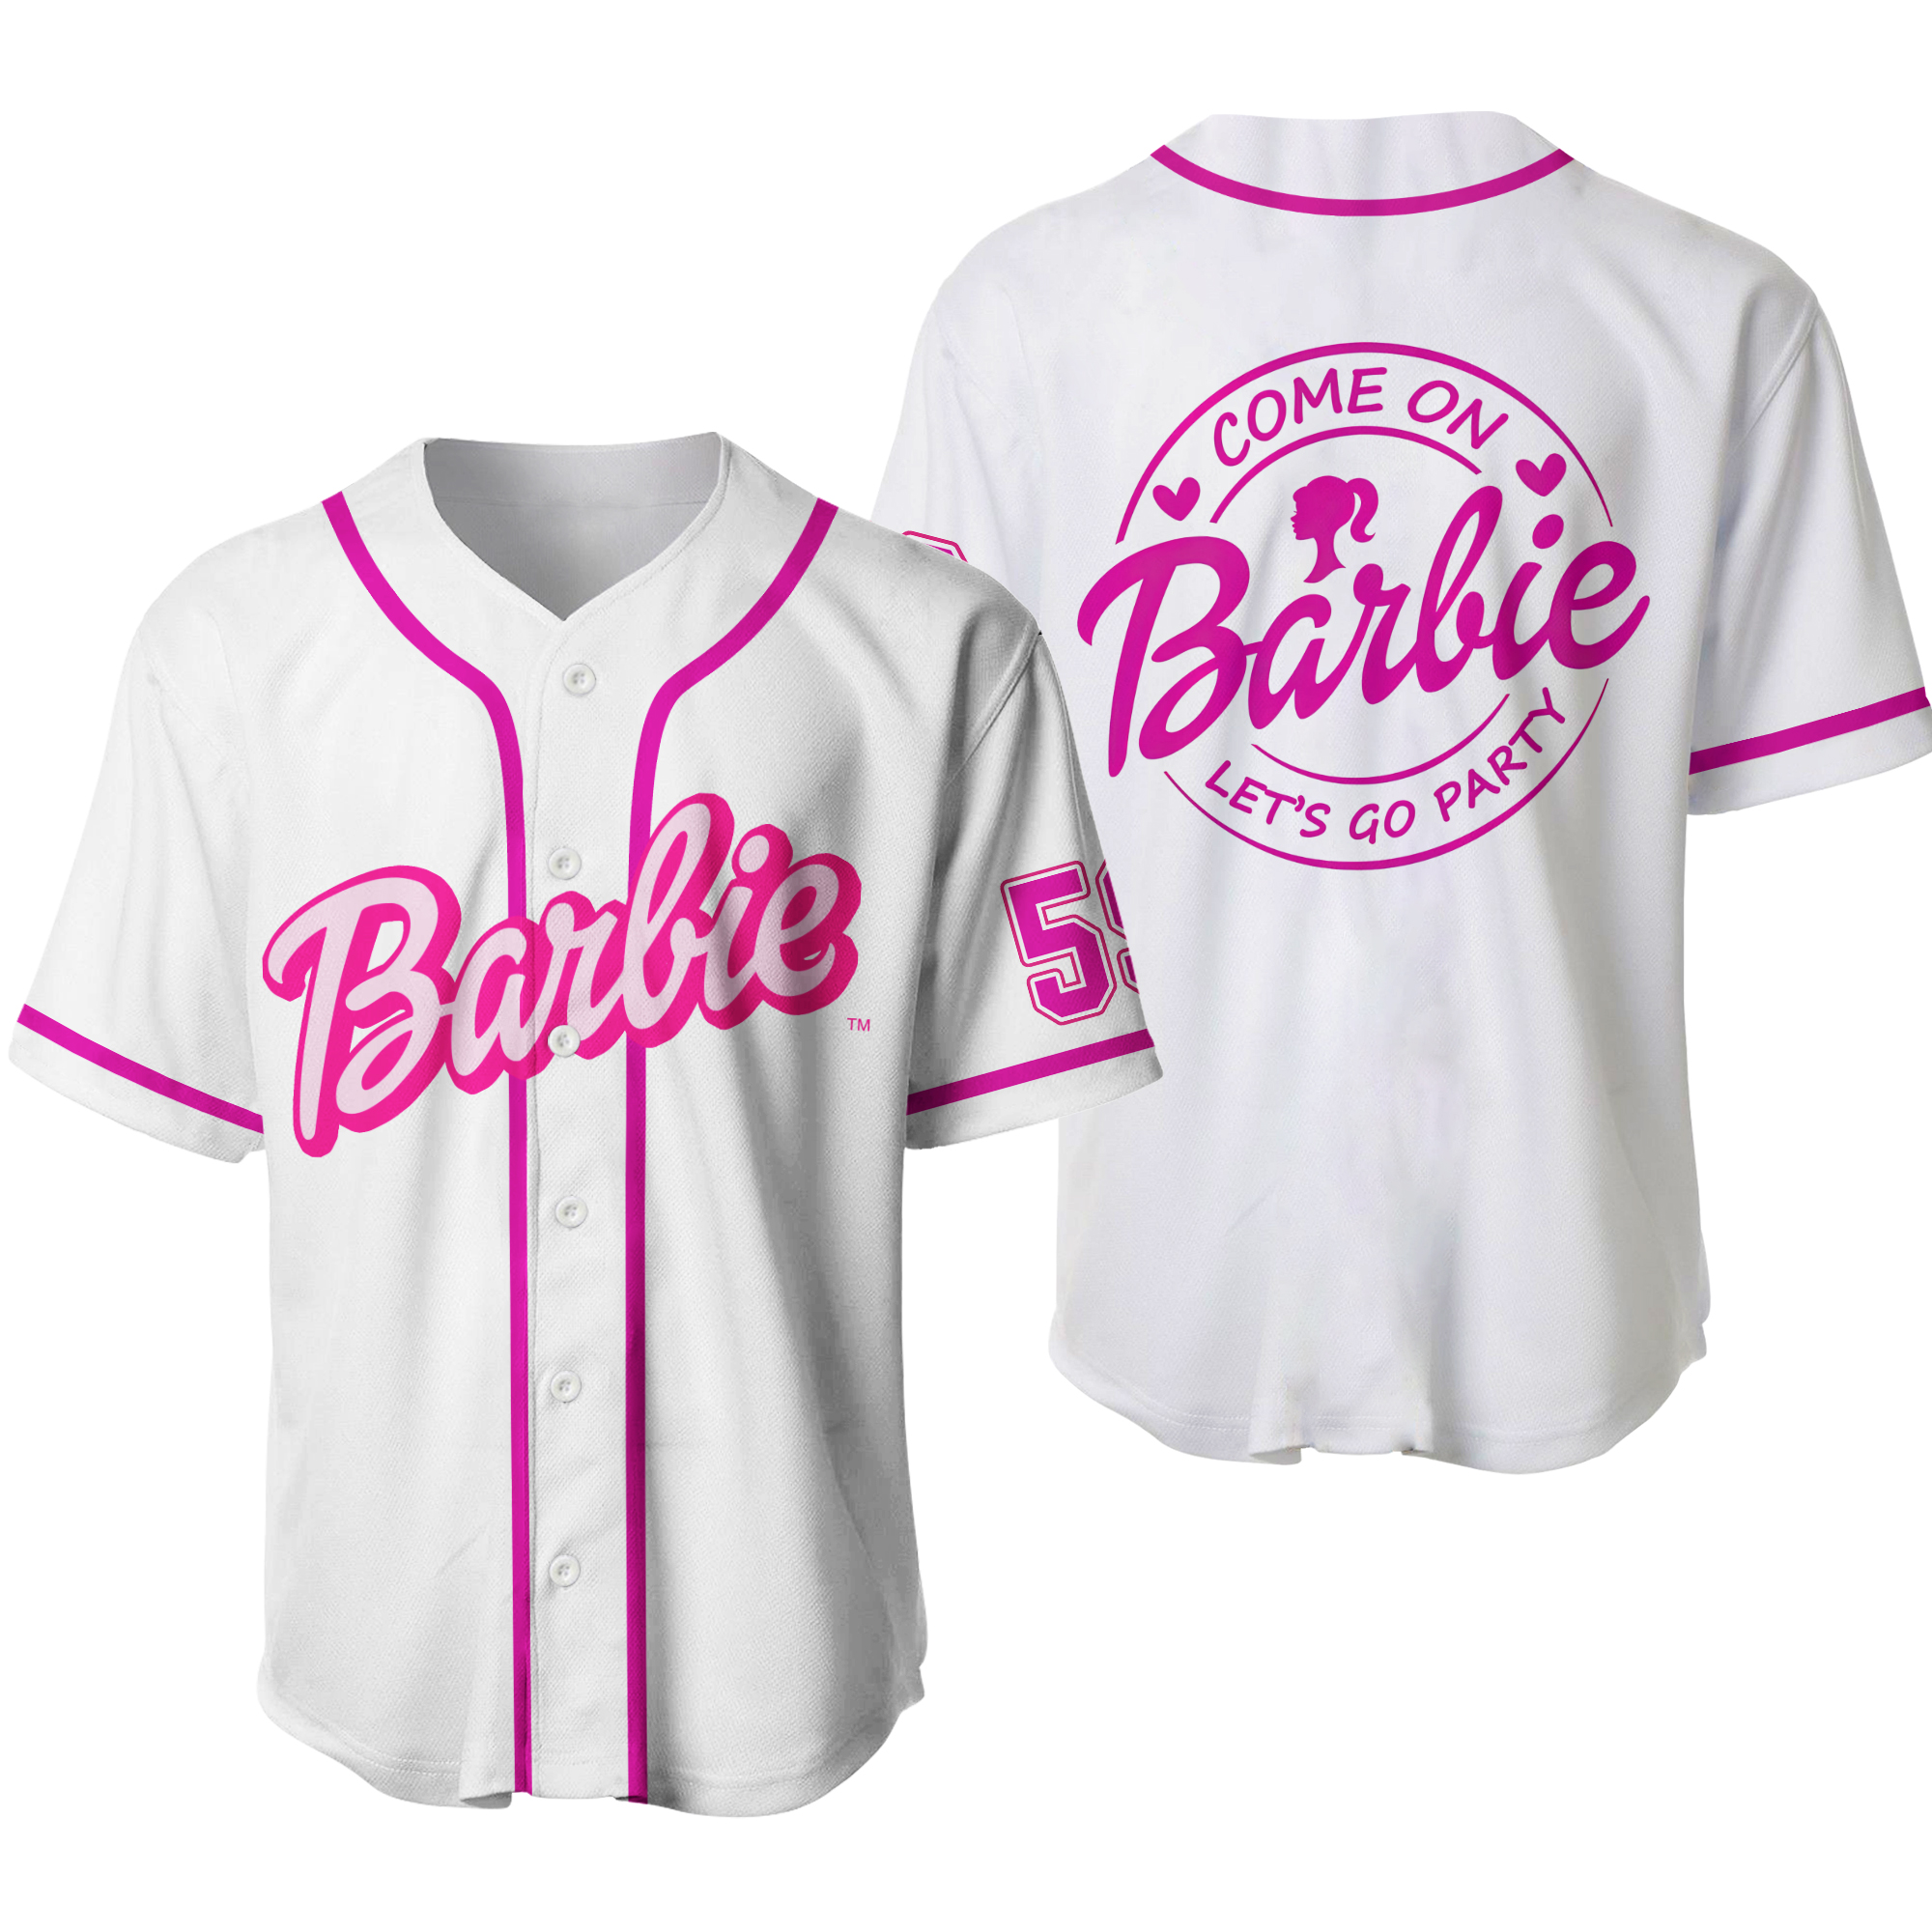 Discover Barbie Baseball Jersey Shirt, Come On Let's Go Party Baseball Jersey